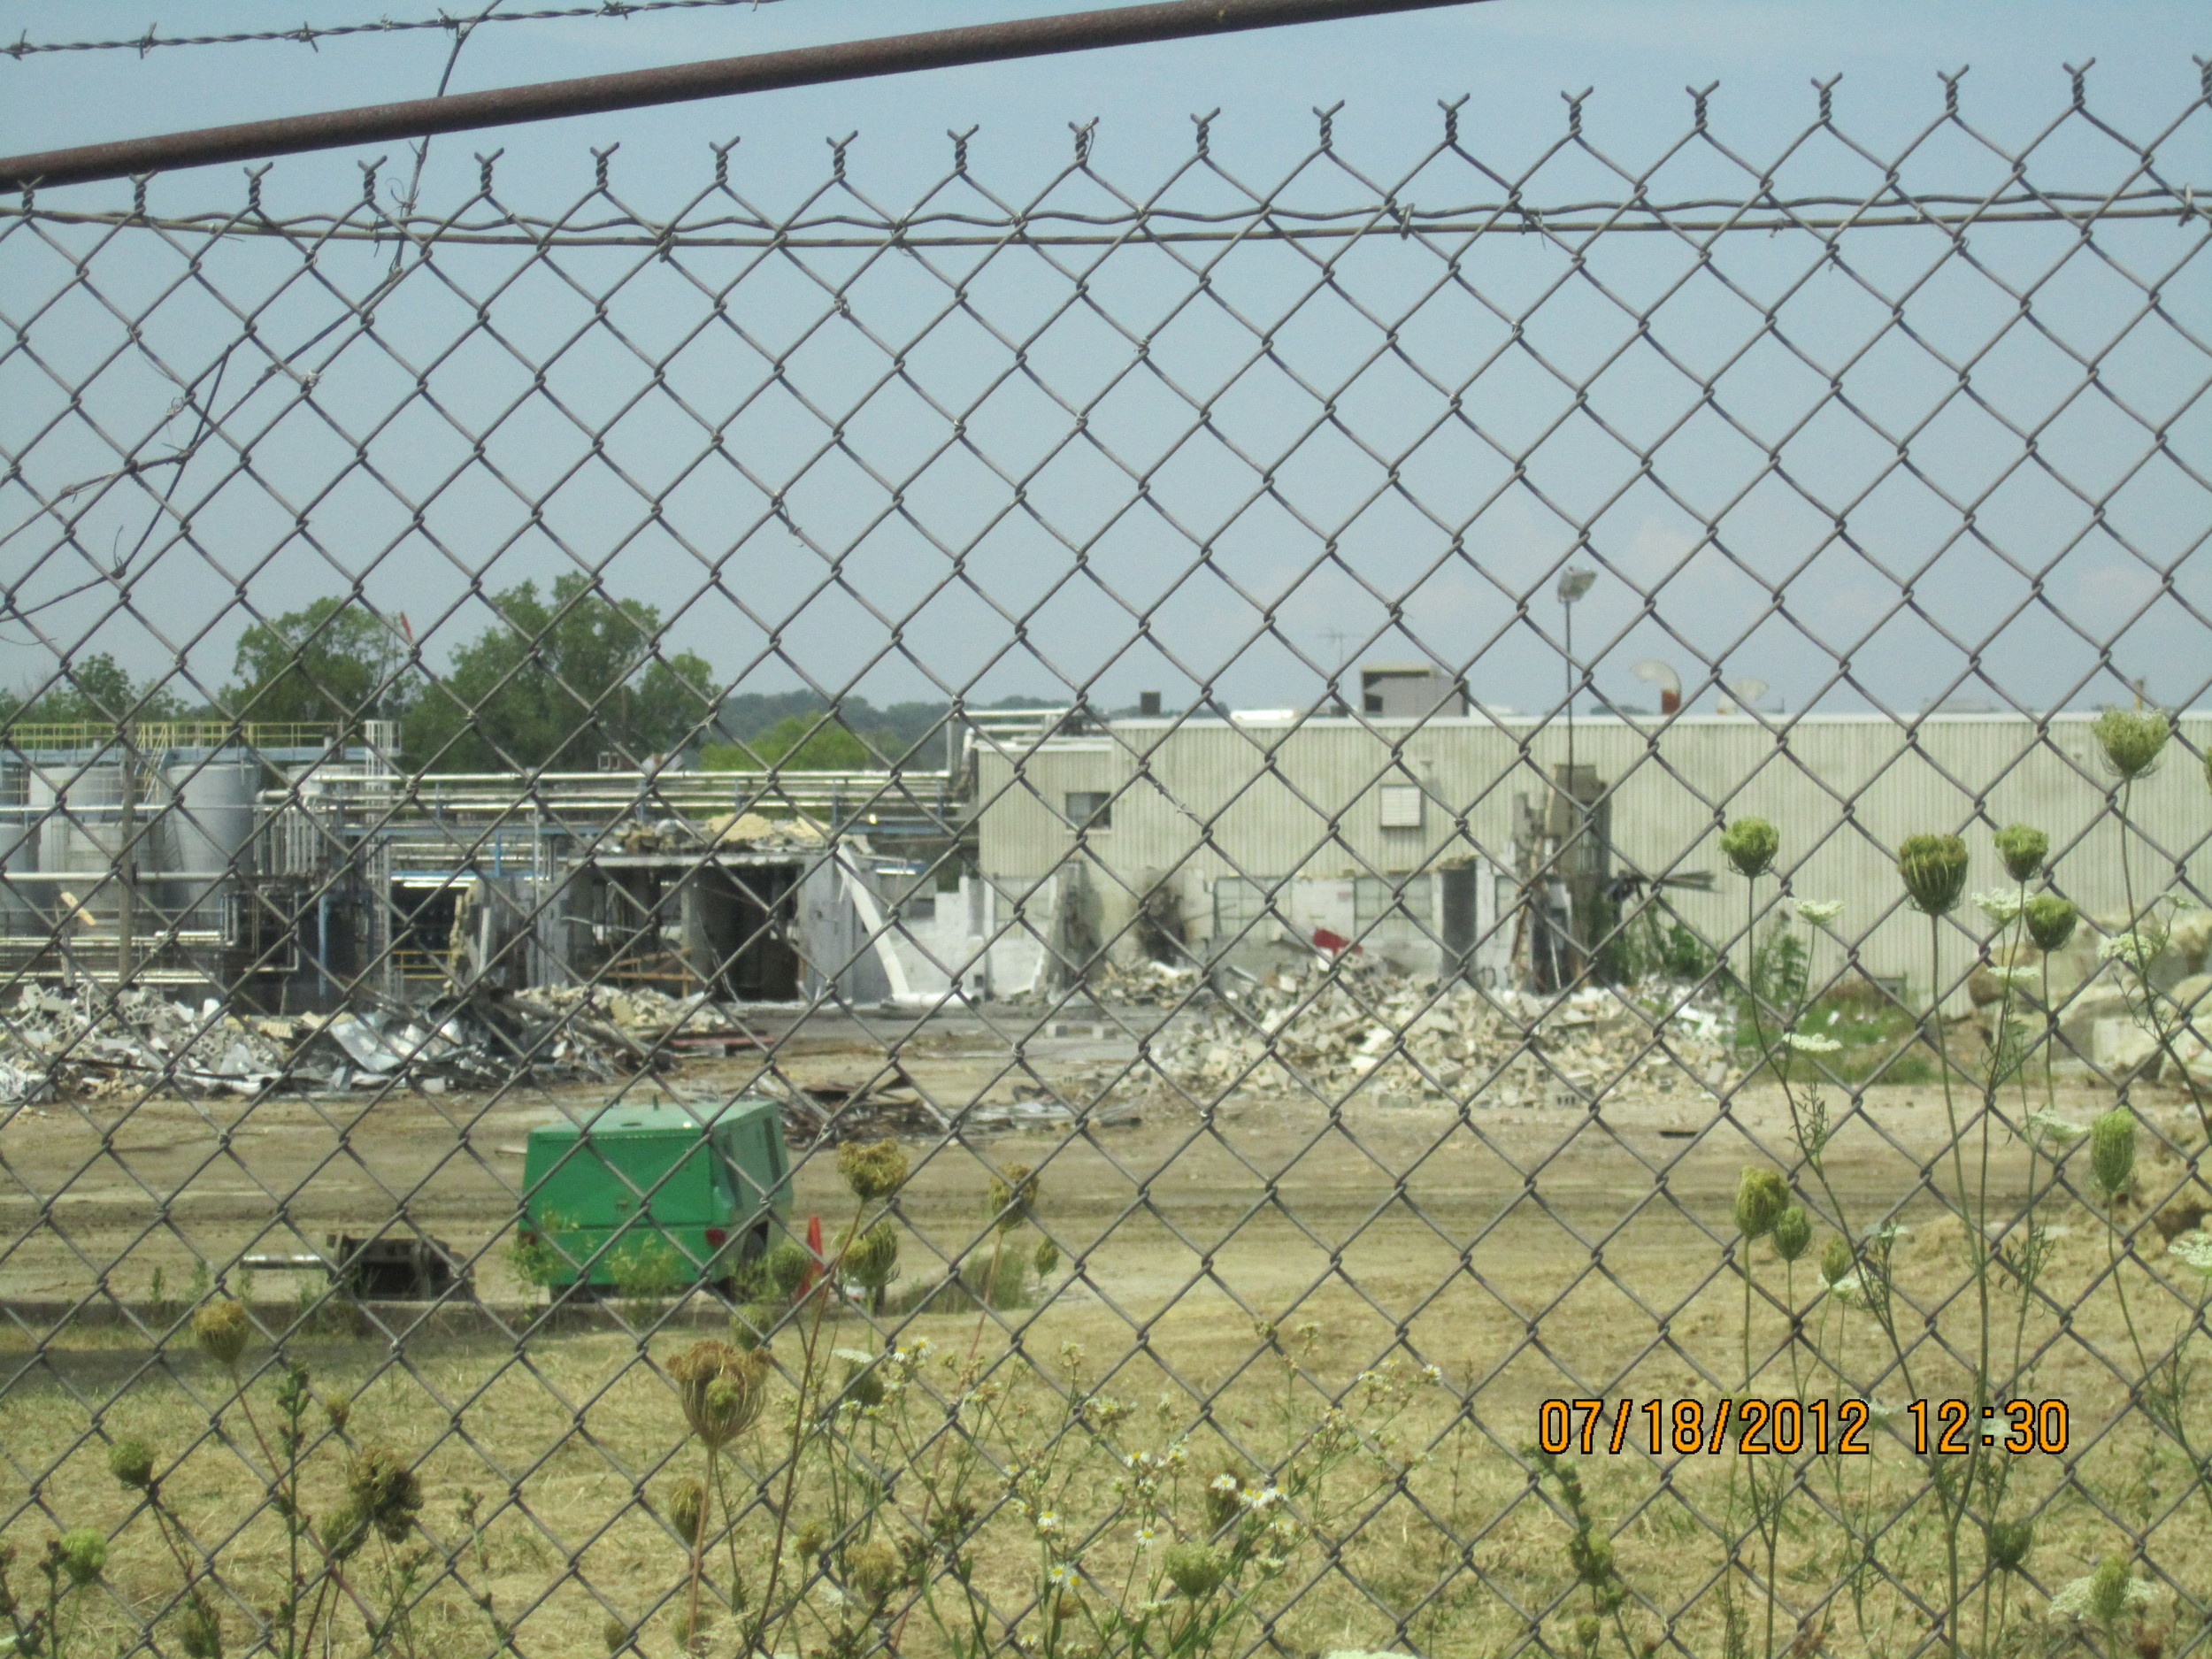 woodlawn-former-hexion-specialty-chemicals-corf_13952354897_o.jpg